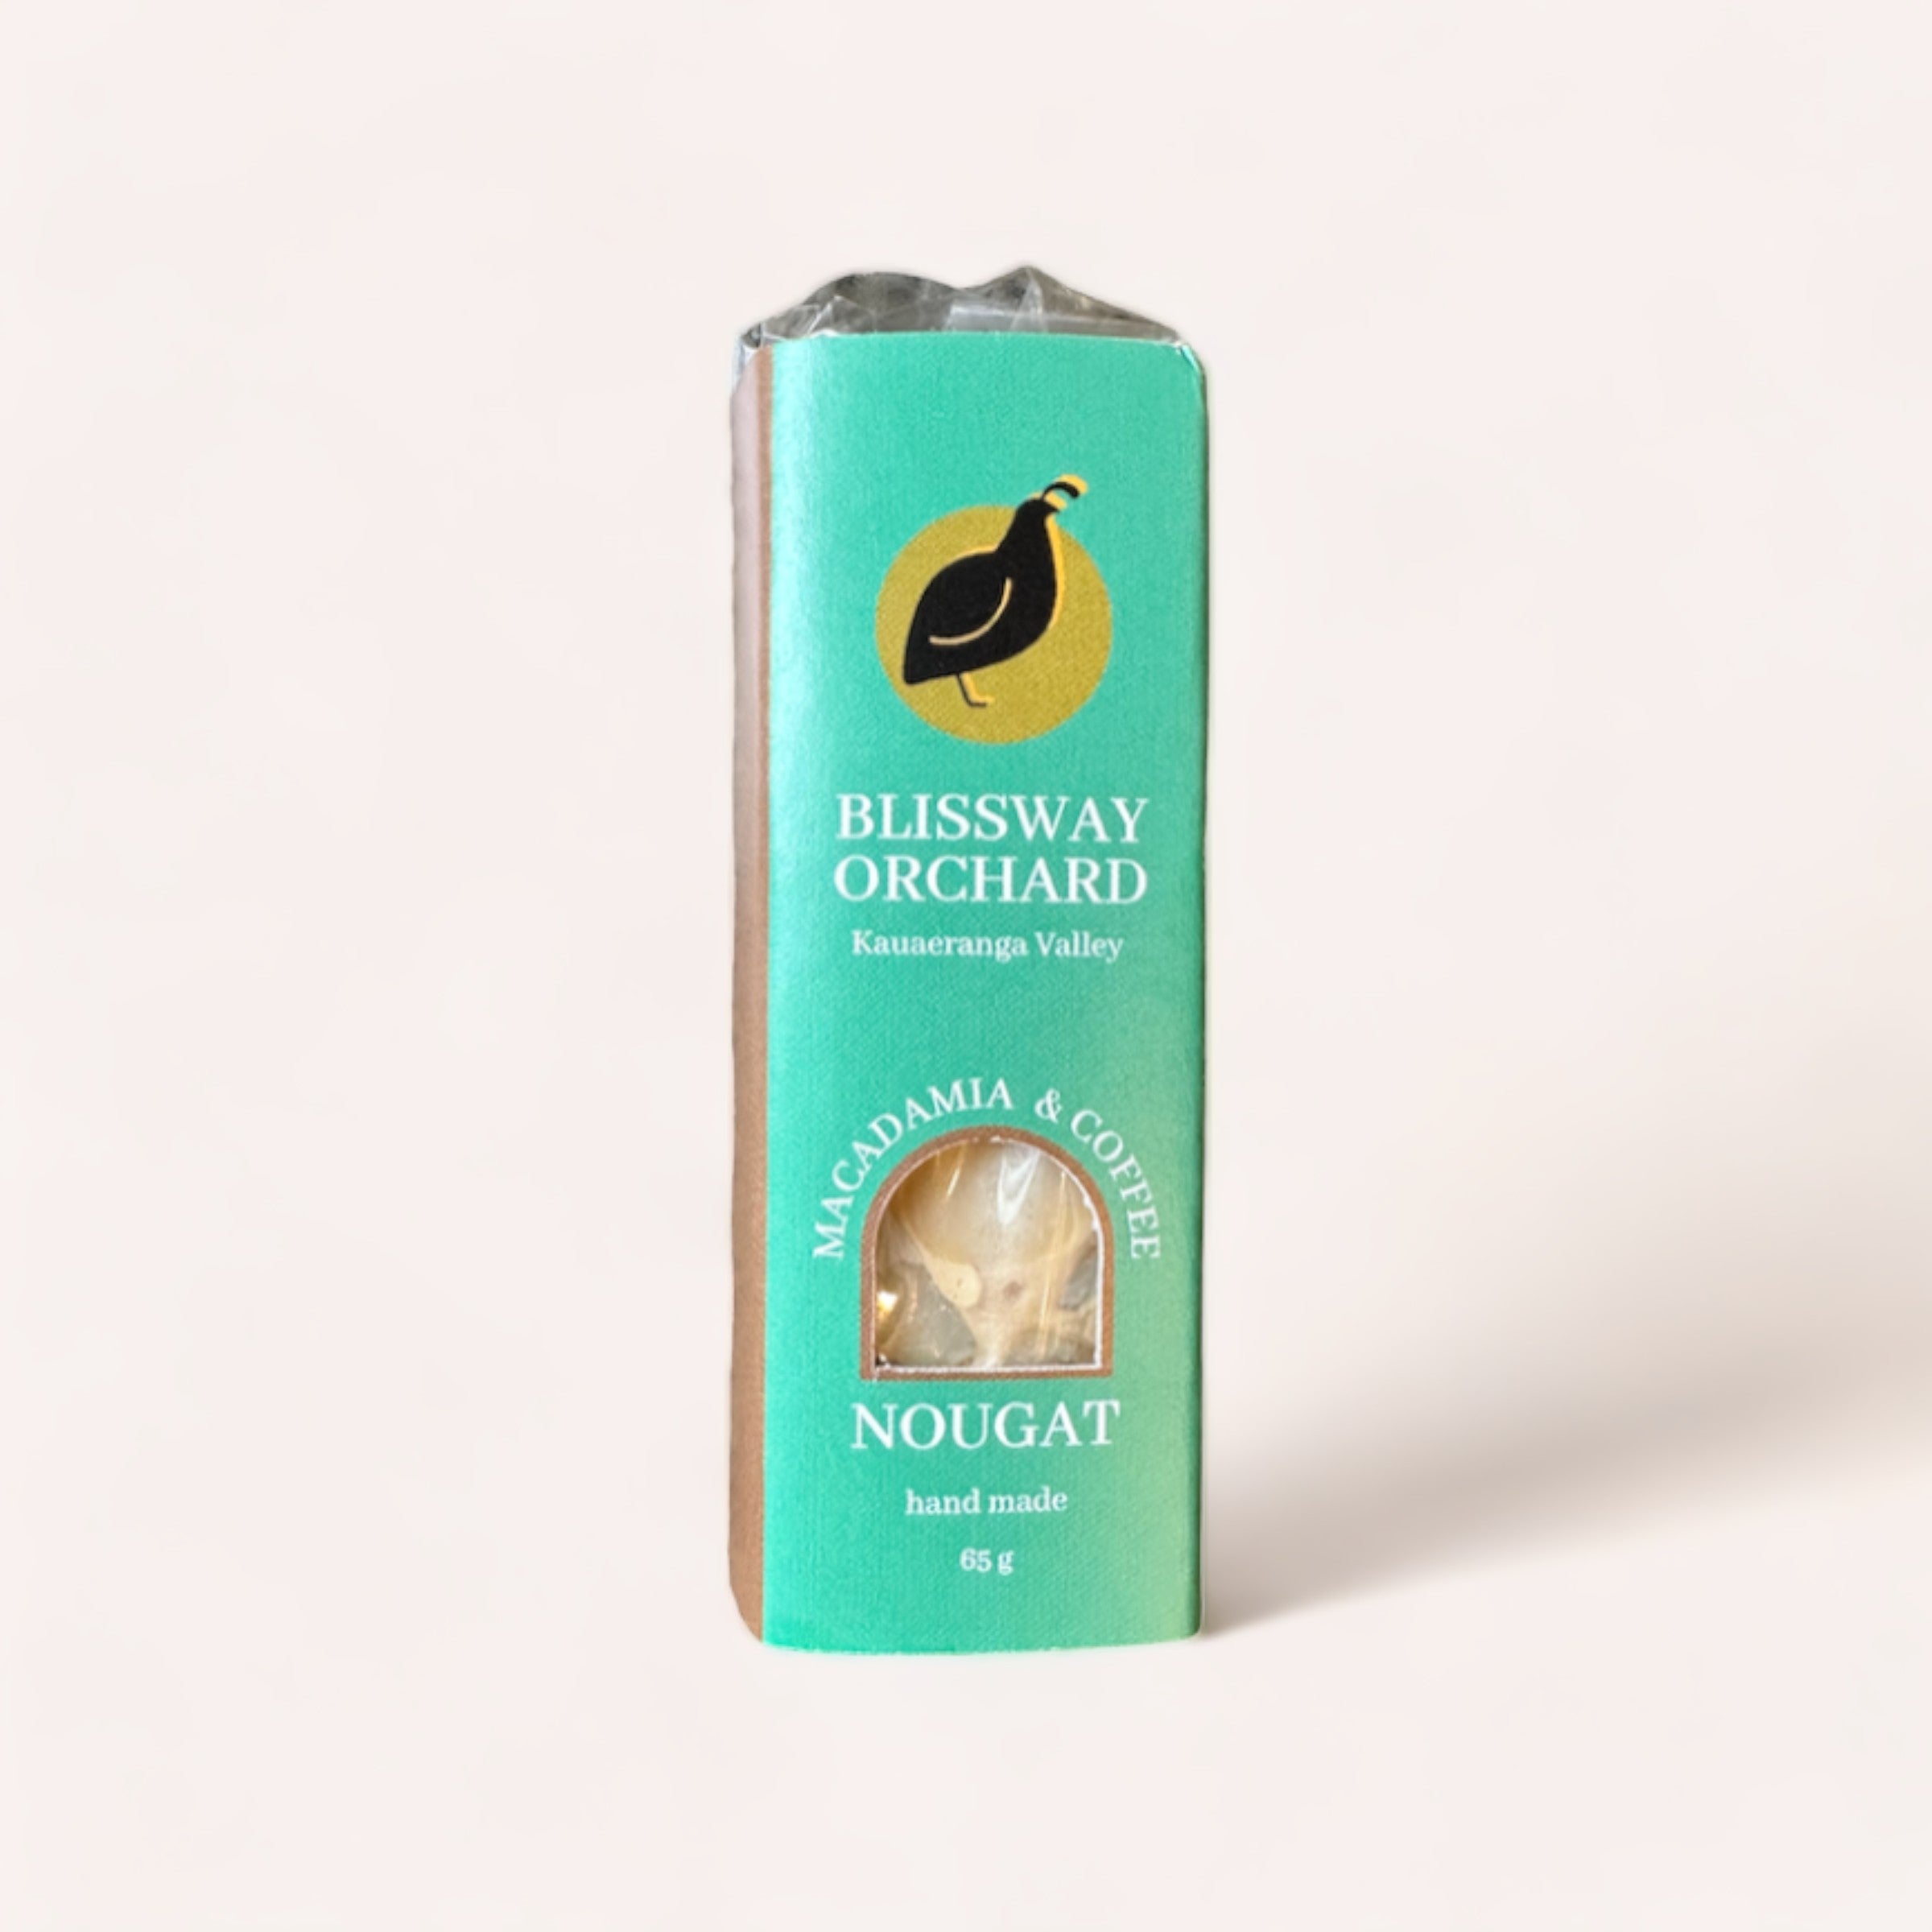 A pack of Macadamia & Coffee Nougat by Blissway Orchard with a light background.